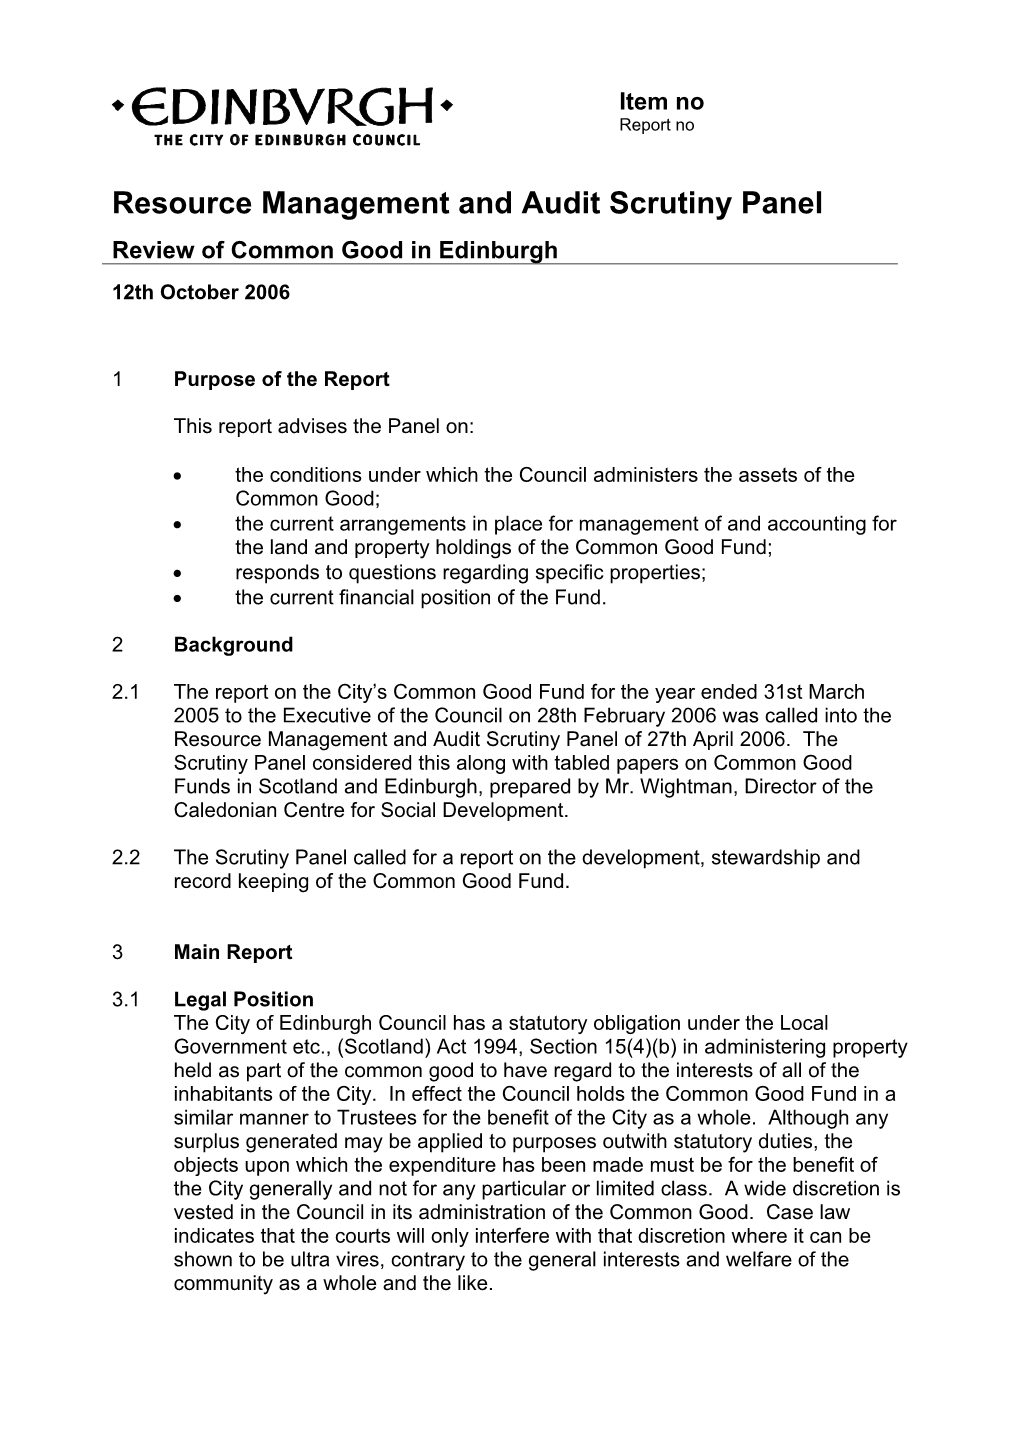 Review of the Common Good in Edinburgh